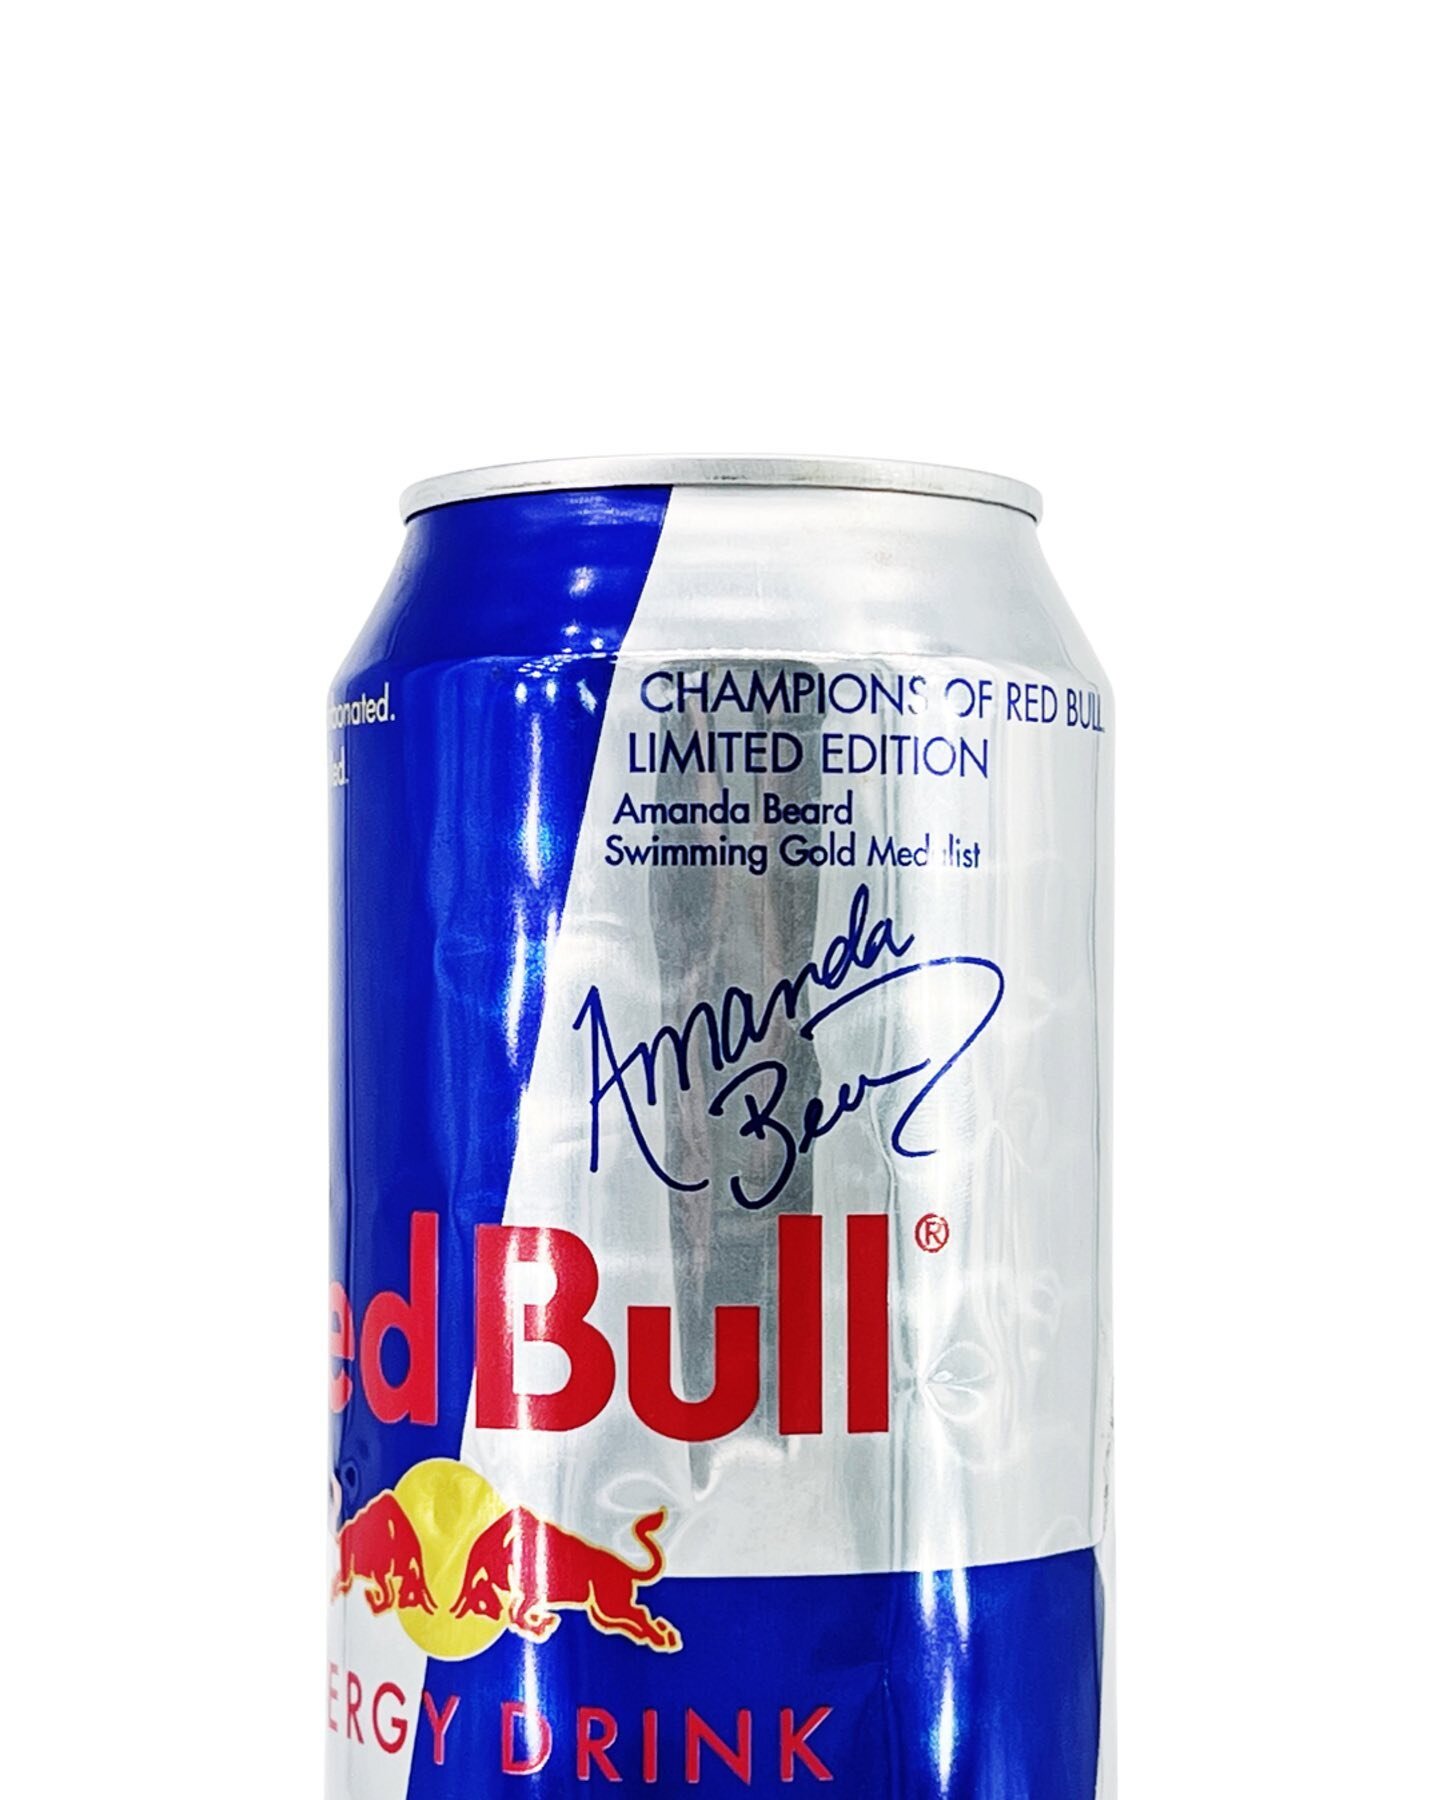 @redbull gives you wiiings and your own autographed can if you&rsquo;re lucky&mdash;raise your hand if you remember these!!! 🙋🏻&zwj;♀️ A few people I worked with at Red Bull had INCREDIBLE collections of cans with actual autographs of some of the g